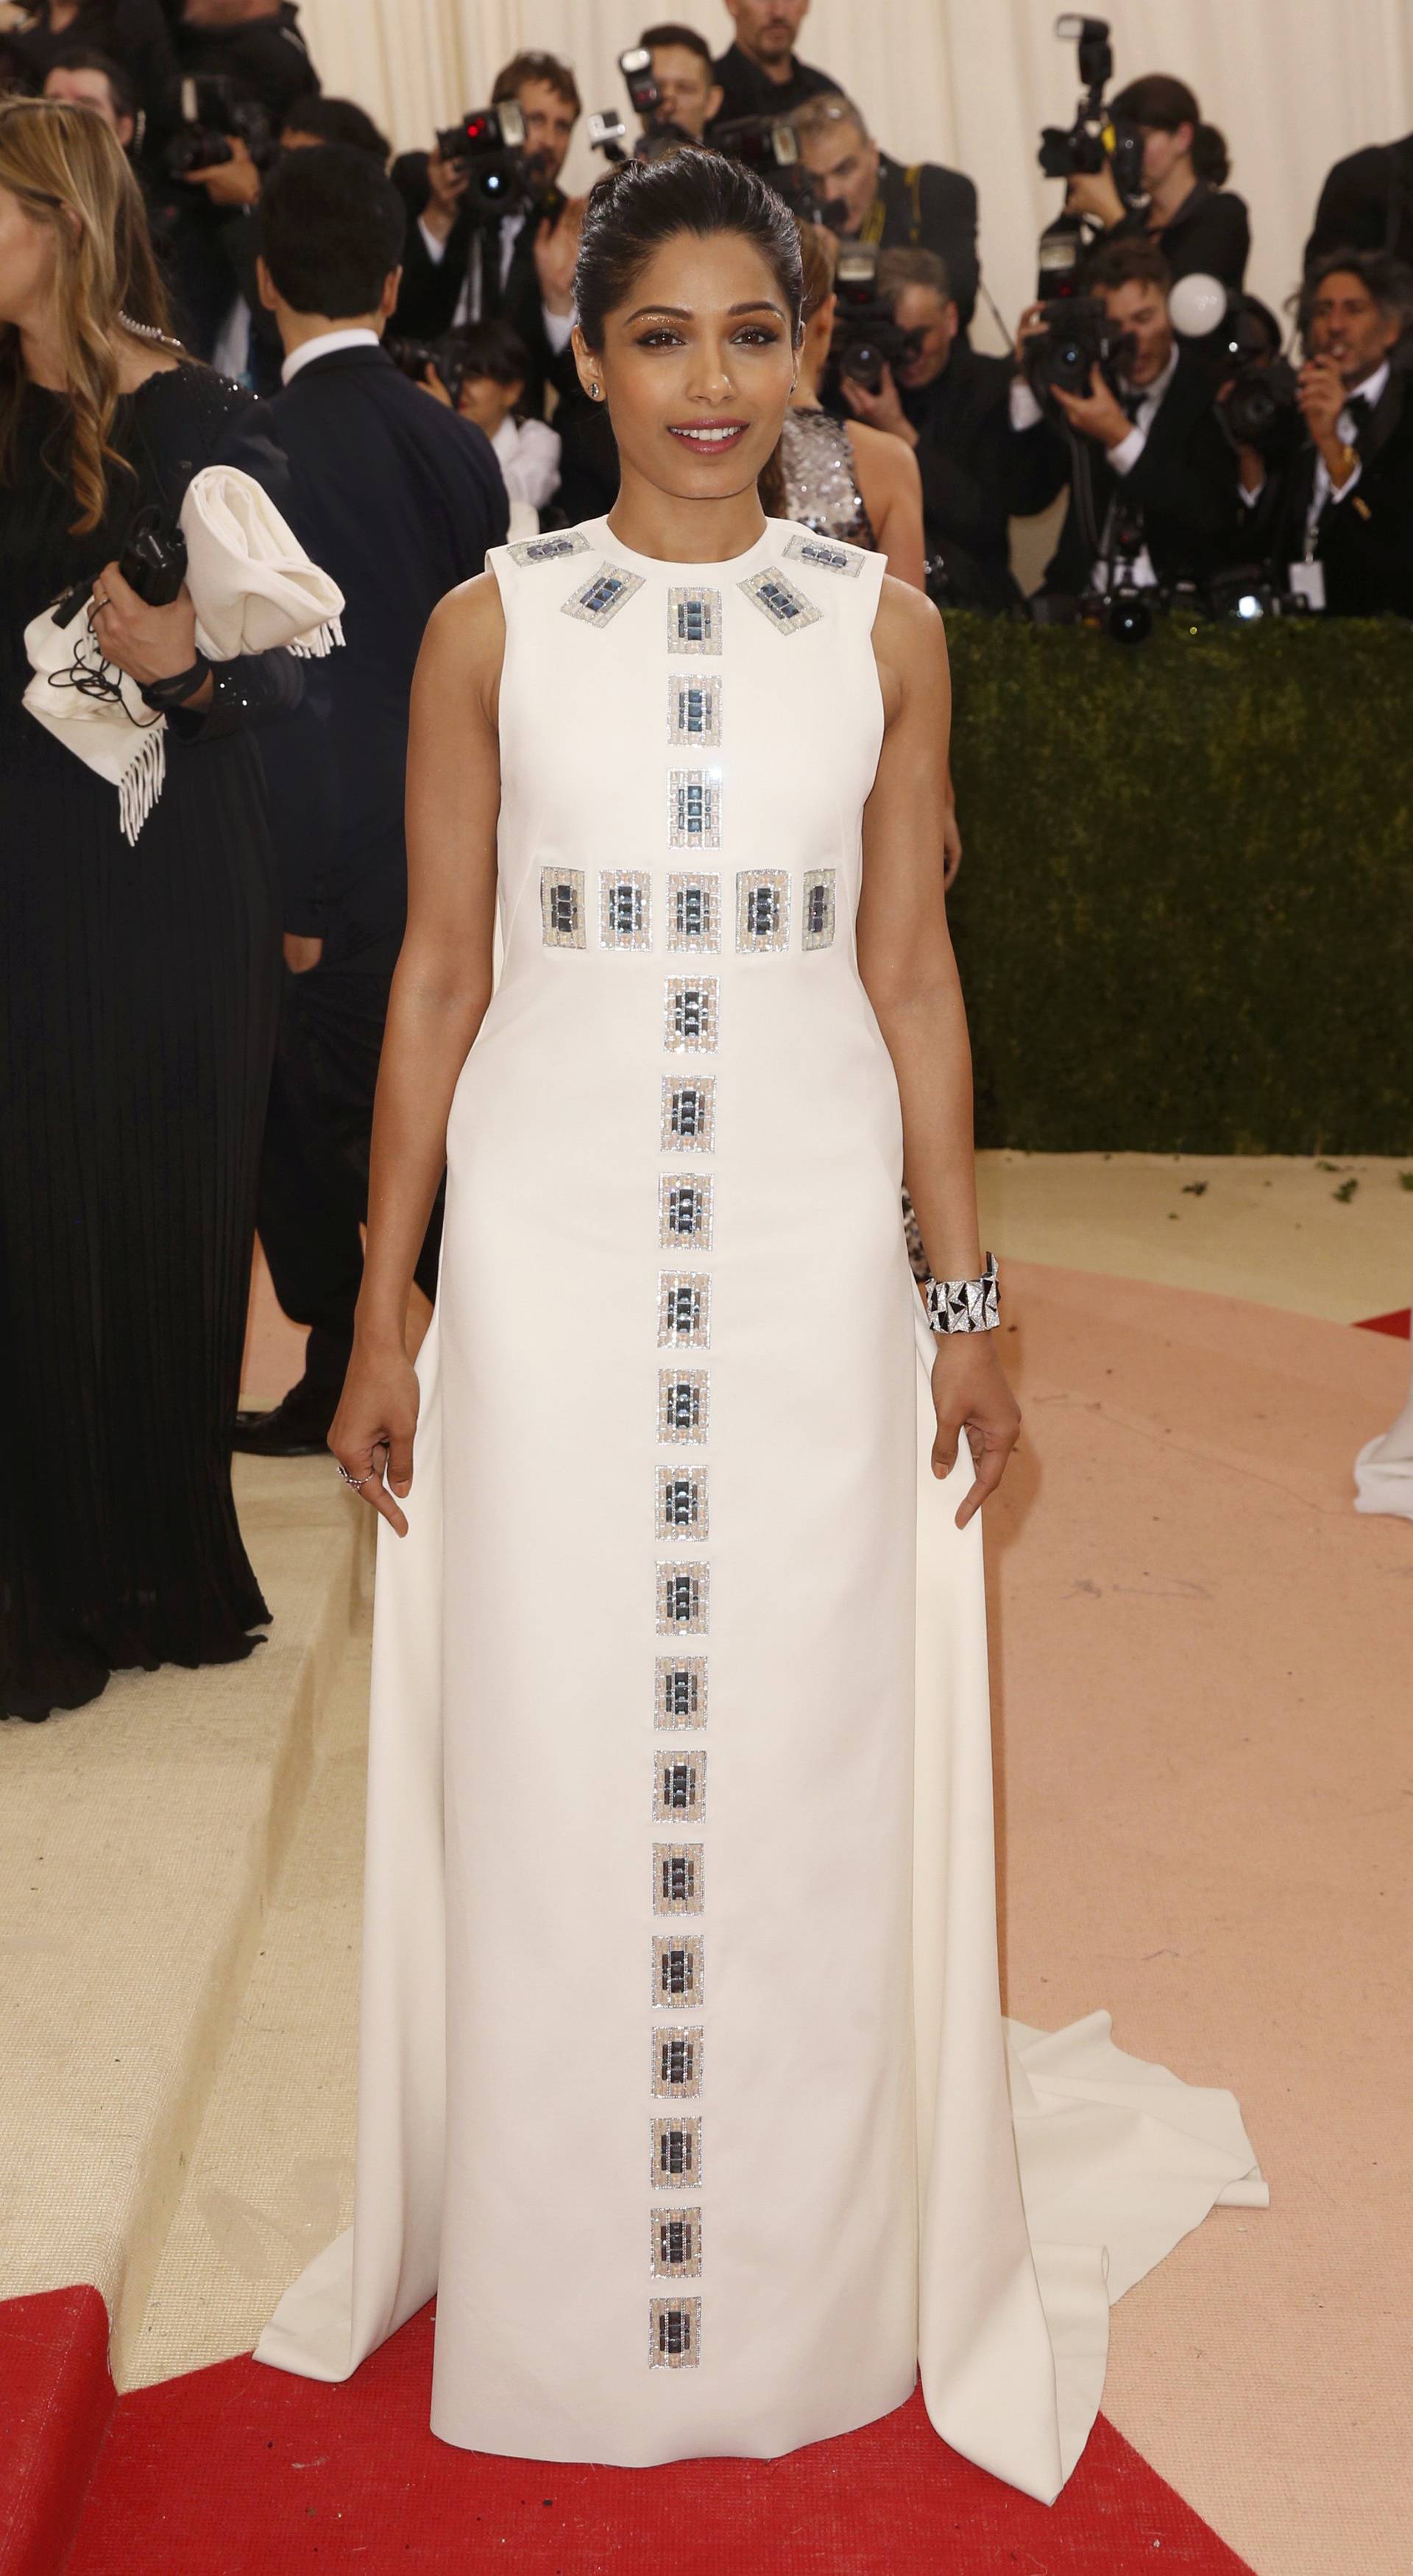 Actress Freida Pinto arrives at the Met Gala in New York